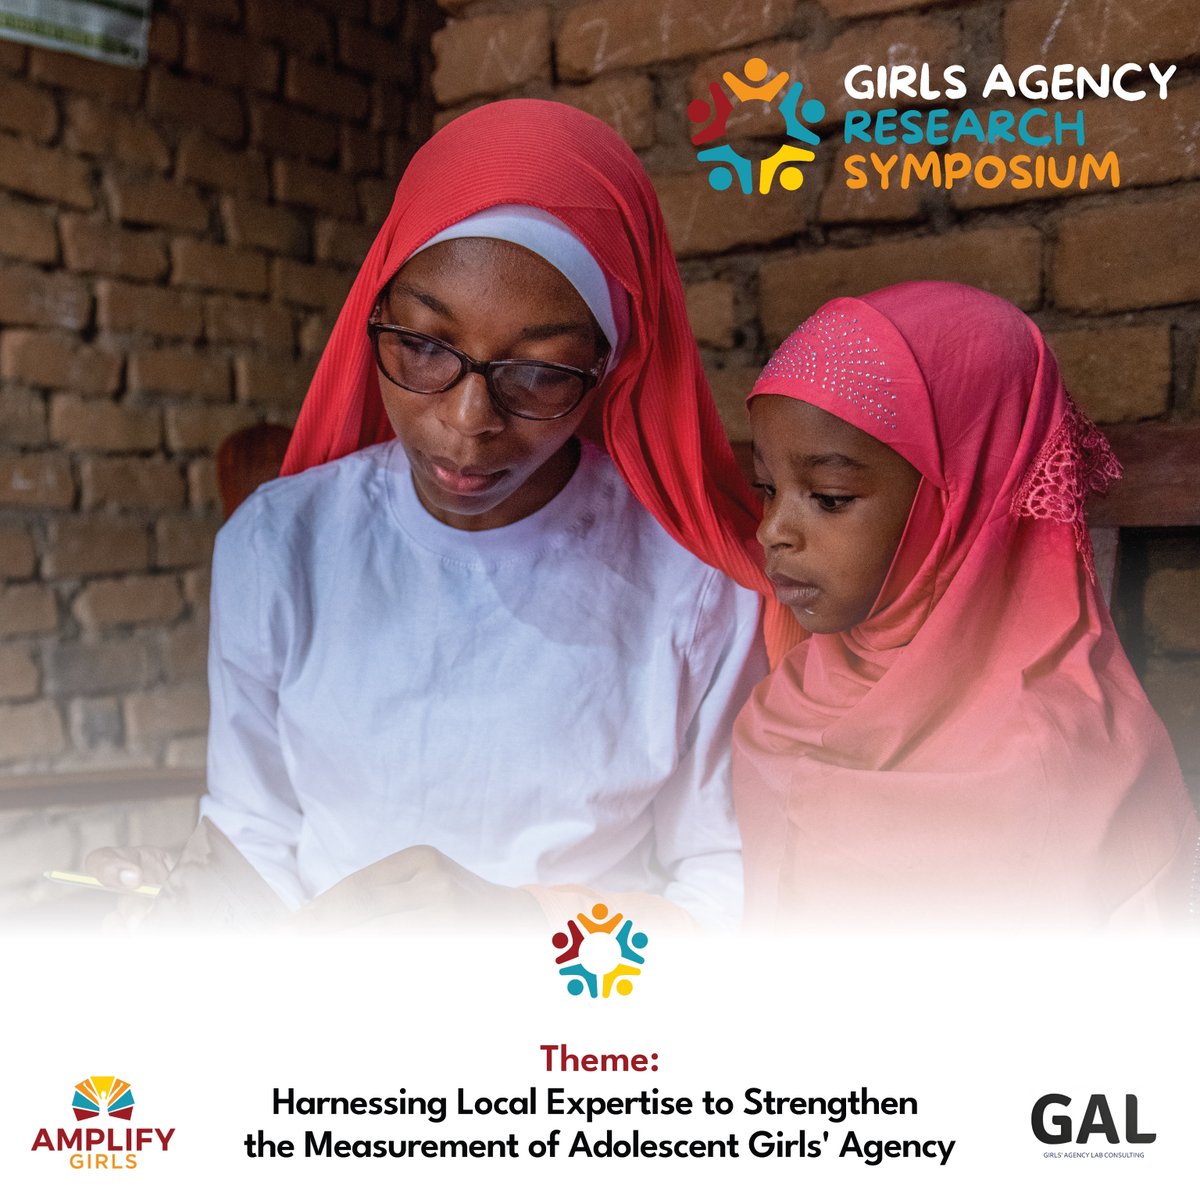 We're ready for the first-ever Girls Agency Research Symposium! The symposium brings together adolescent girls, experts. & 34 community organizations to review study results from the Adolescent Girls Agency Survey and harness insights to refine the survey. Stay tuned. #AMPLIFYHer